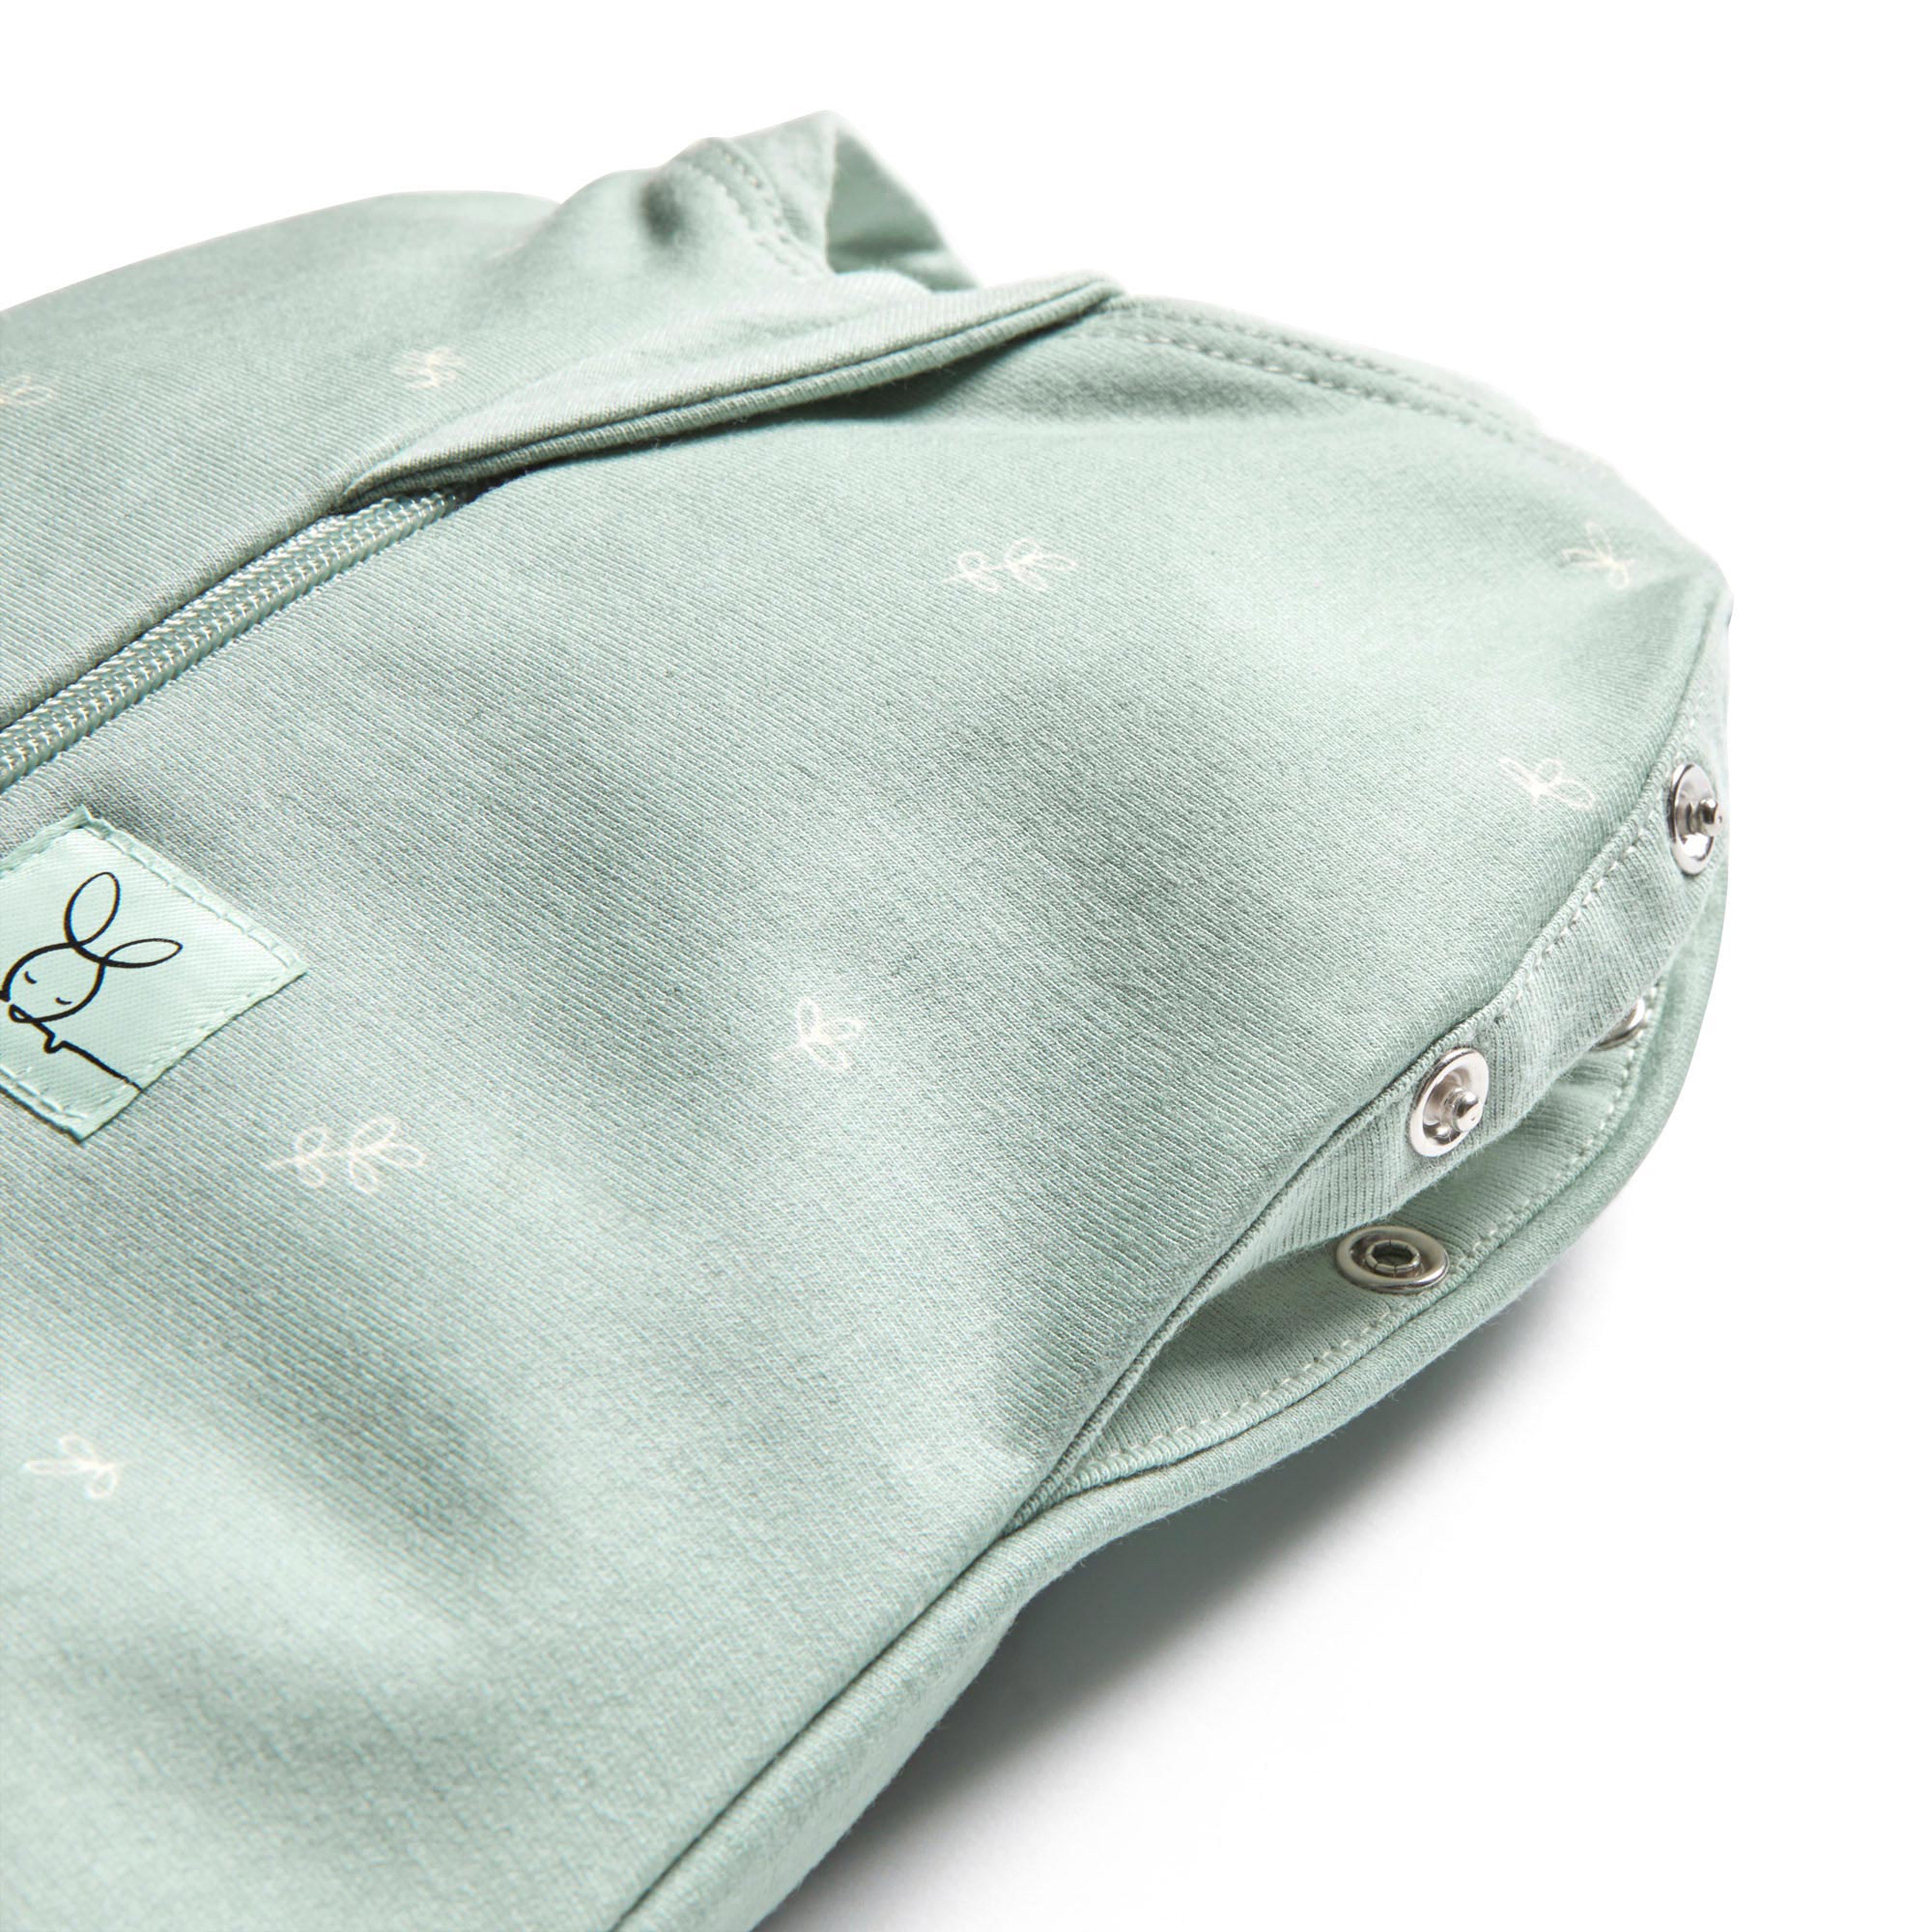 ergopouch-cocoon-swaddle-bag-0-2-tog-grey-marle-ergo-zepco-0-2t00-03mgm19- (4)